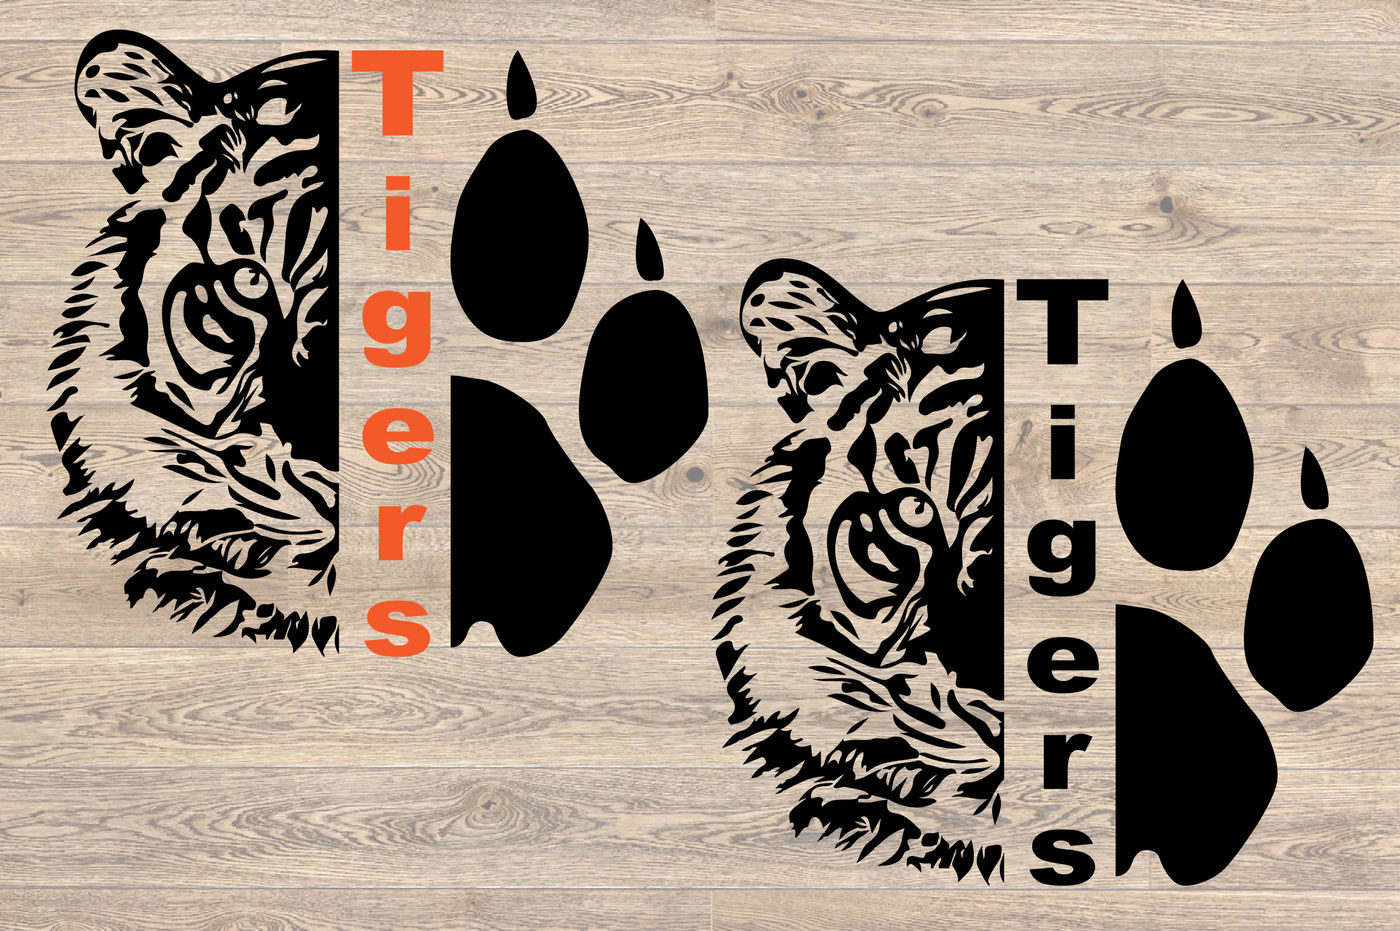 Download Tigers Svg Files For Cricut Tigers Svg Tigers Football Svg Tigers Svg Cut File Tigers Svg File Tigers Svg Designs Clip Art Art Collectibles Sultraline Id